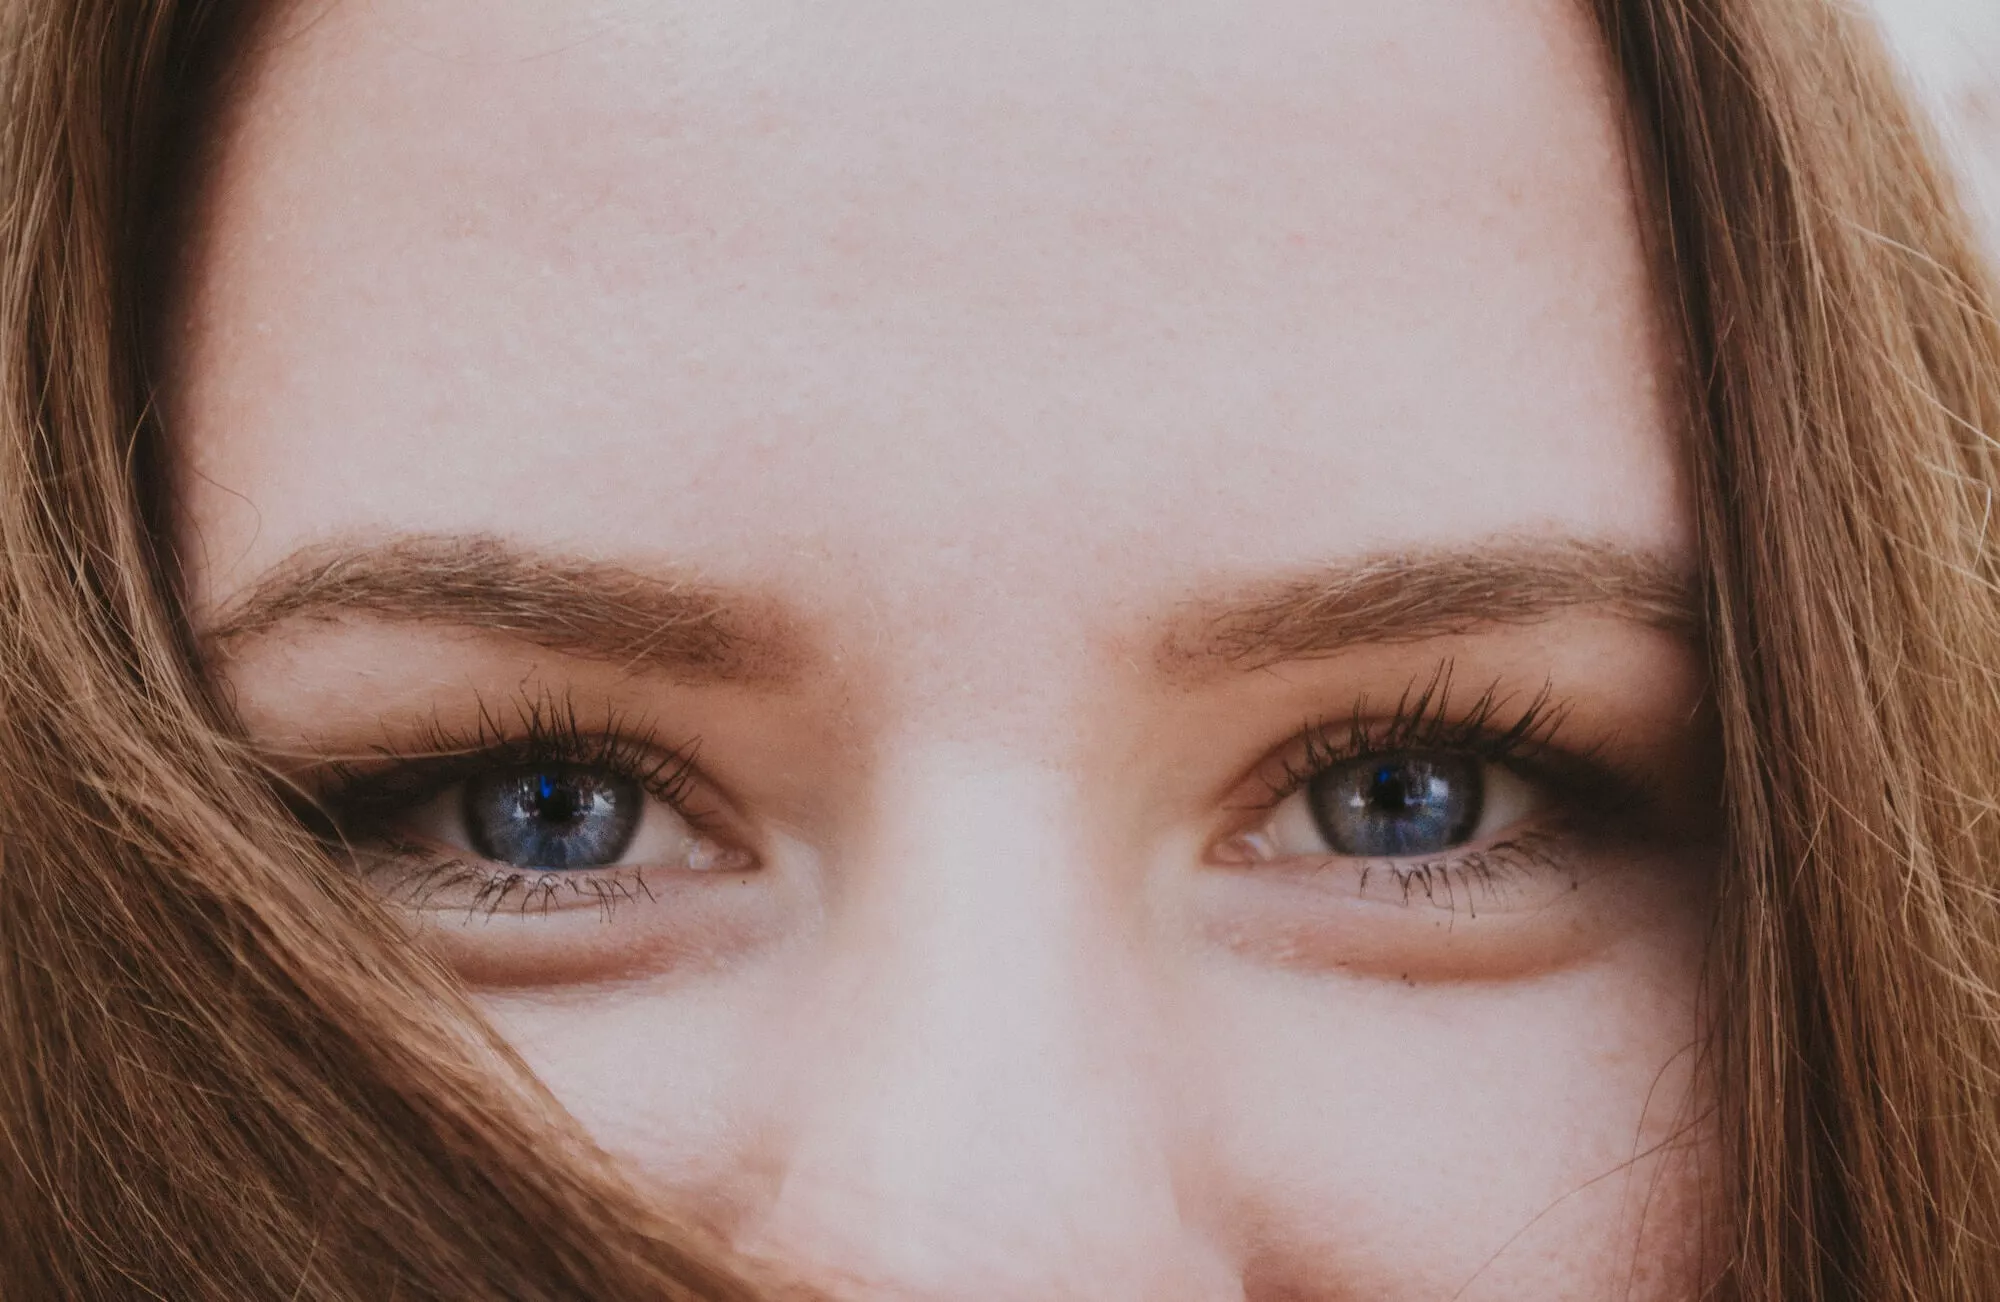 I am an African-American. Why do I have blue eyes? - The Tech